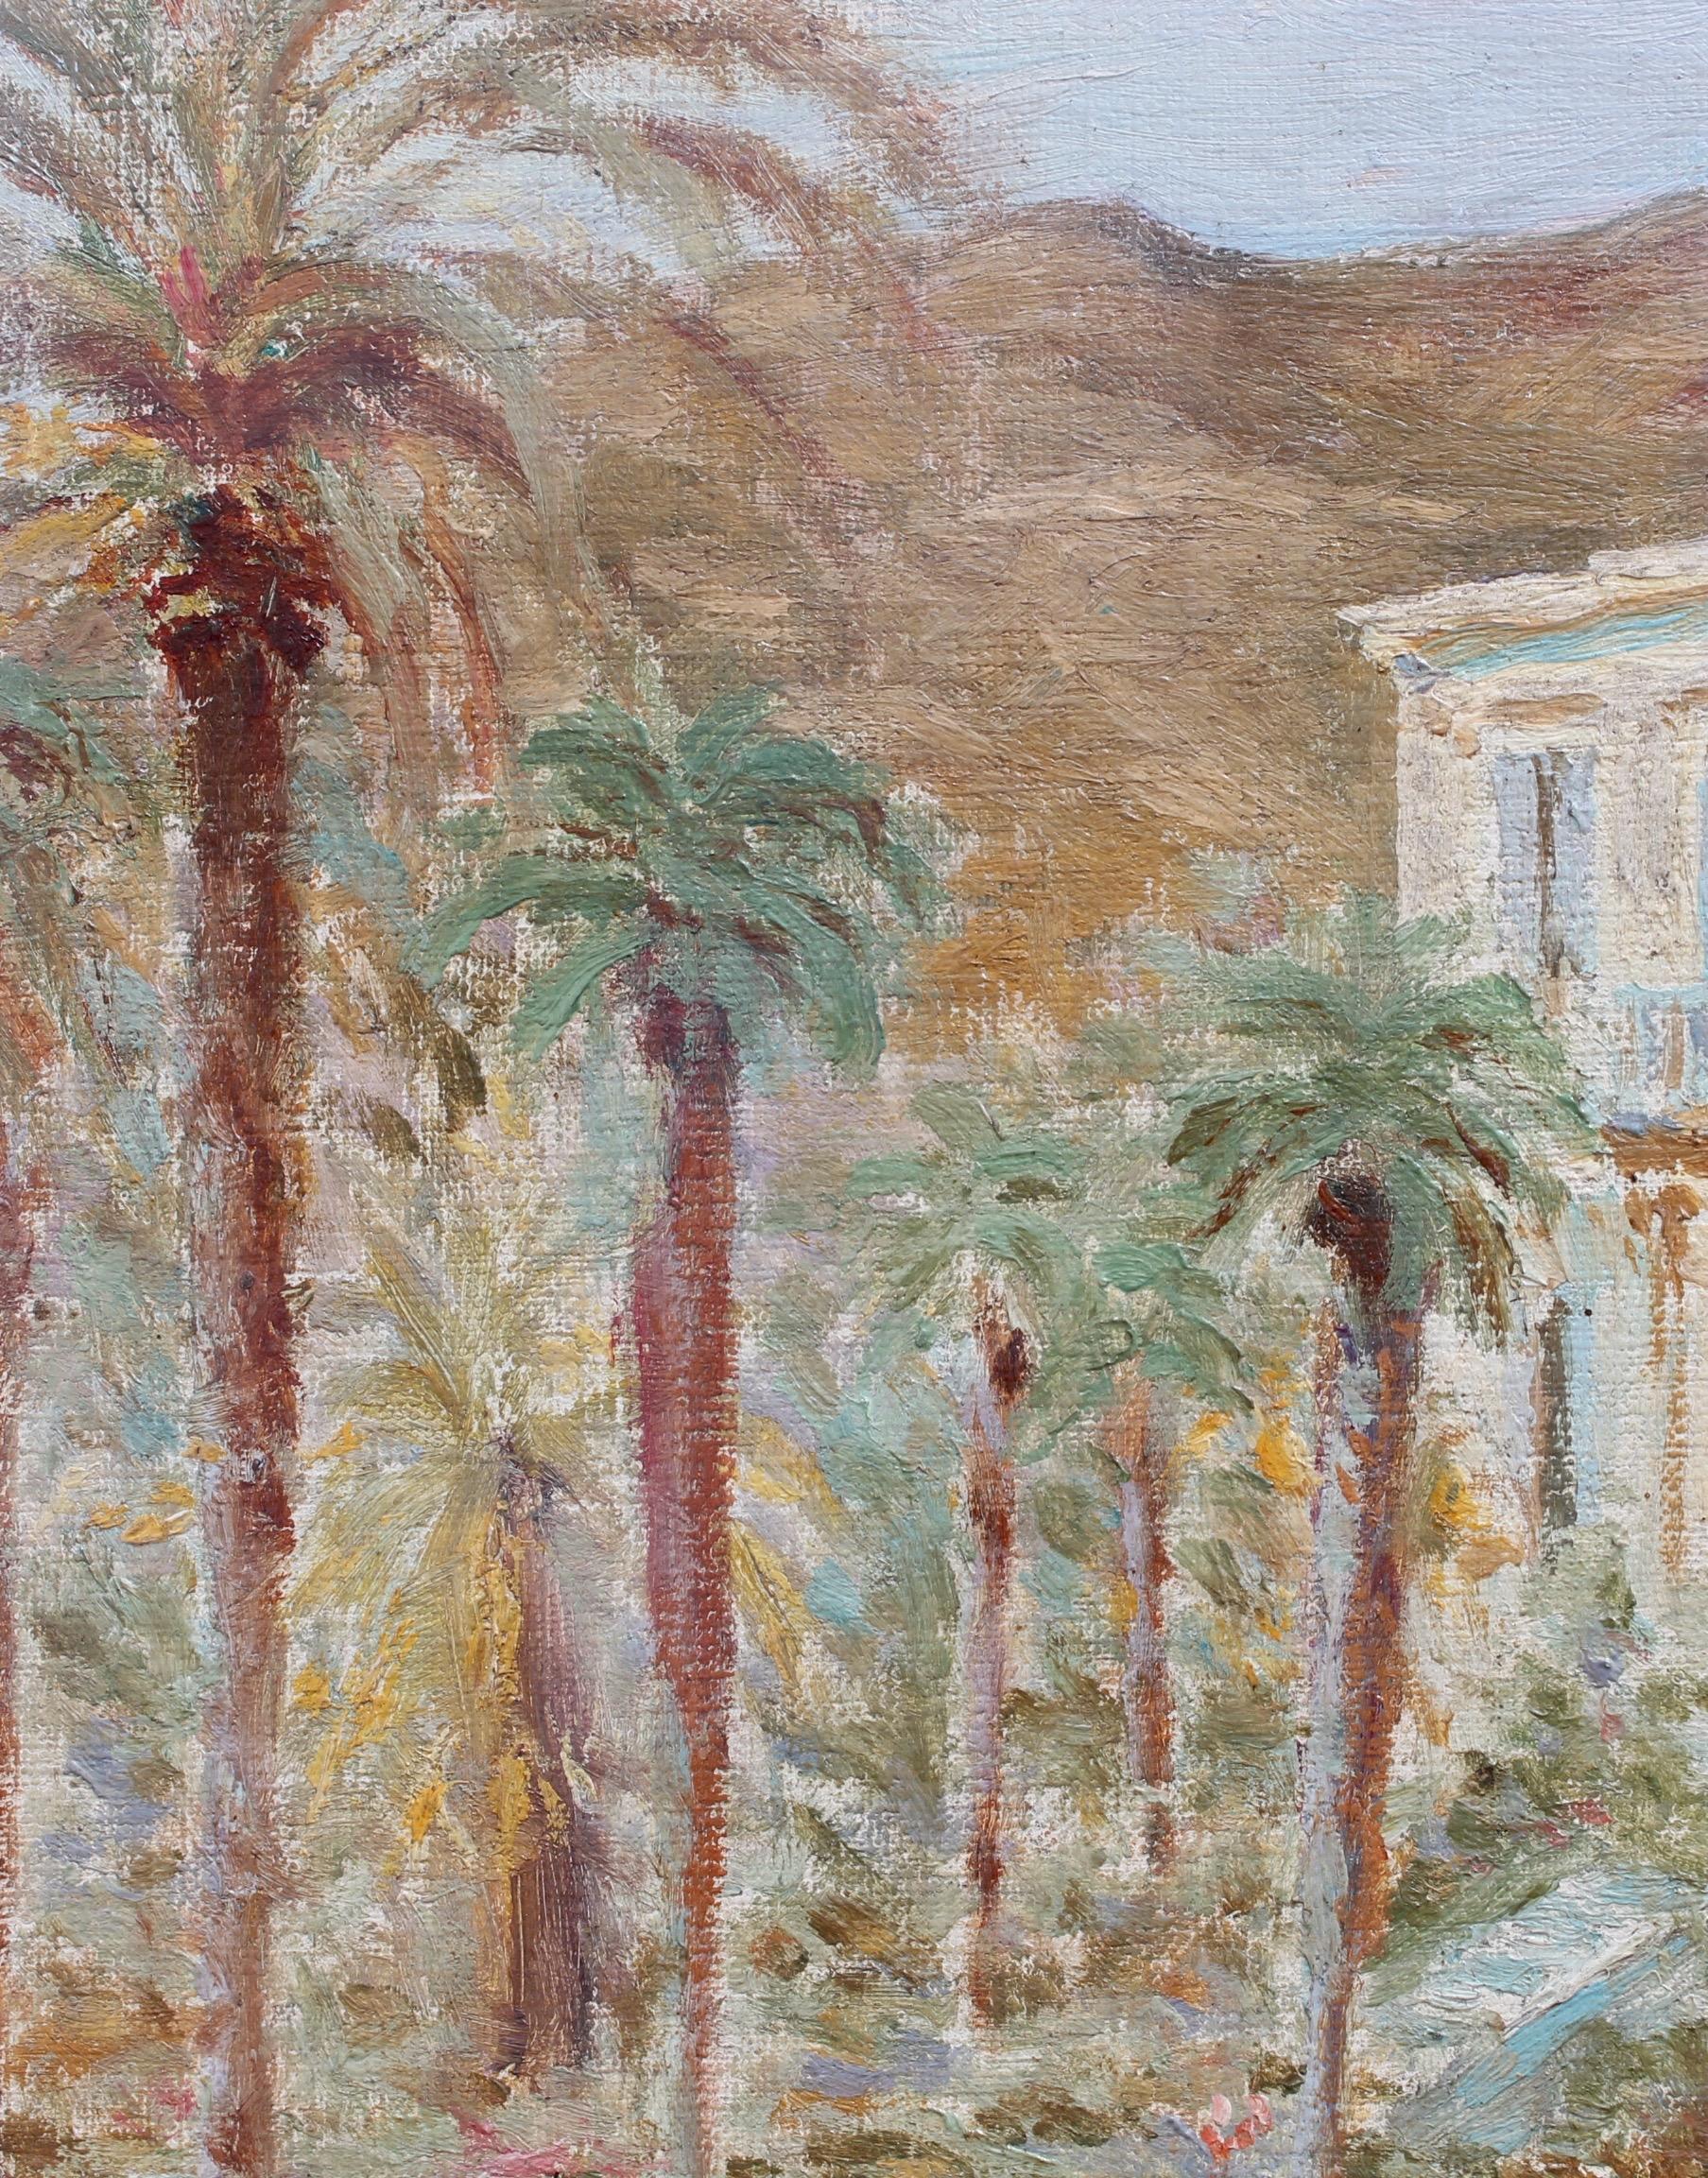 French Riviera Home - Impressionist Painting by R. de Lamy